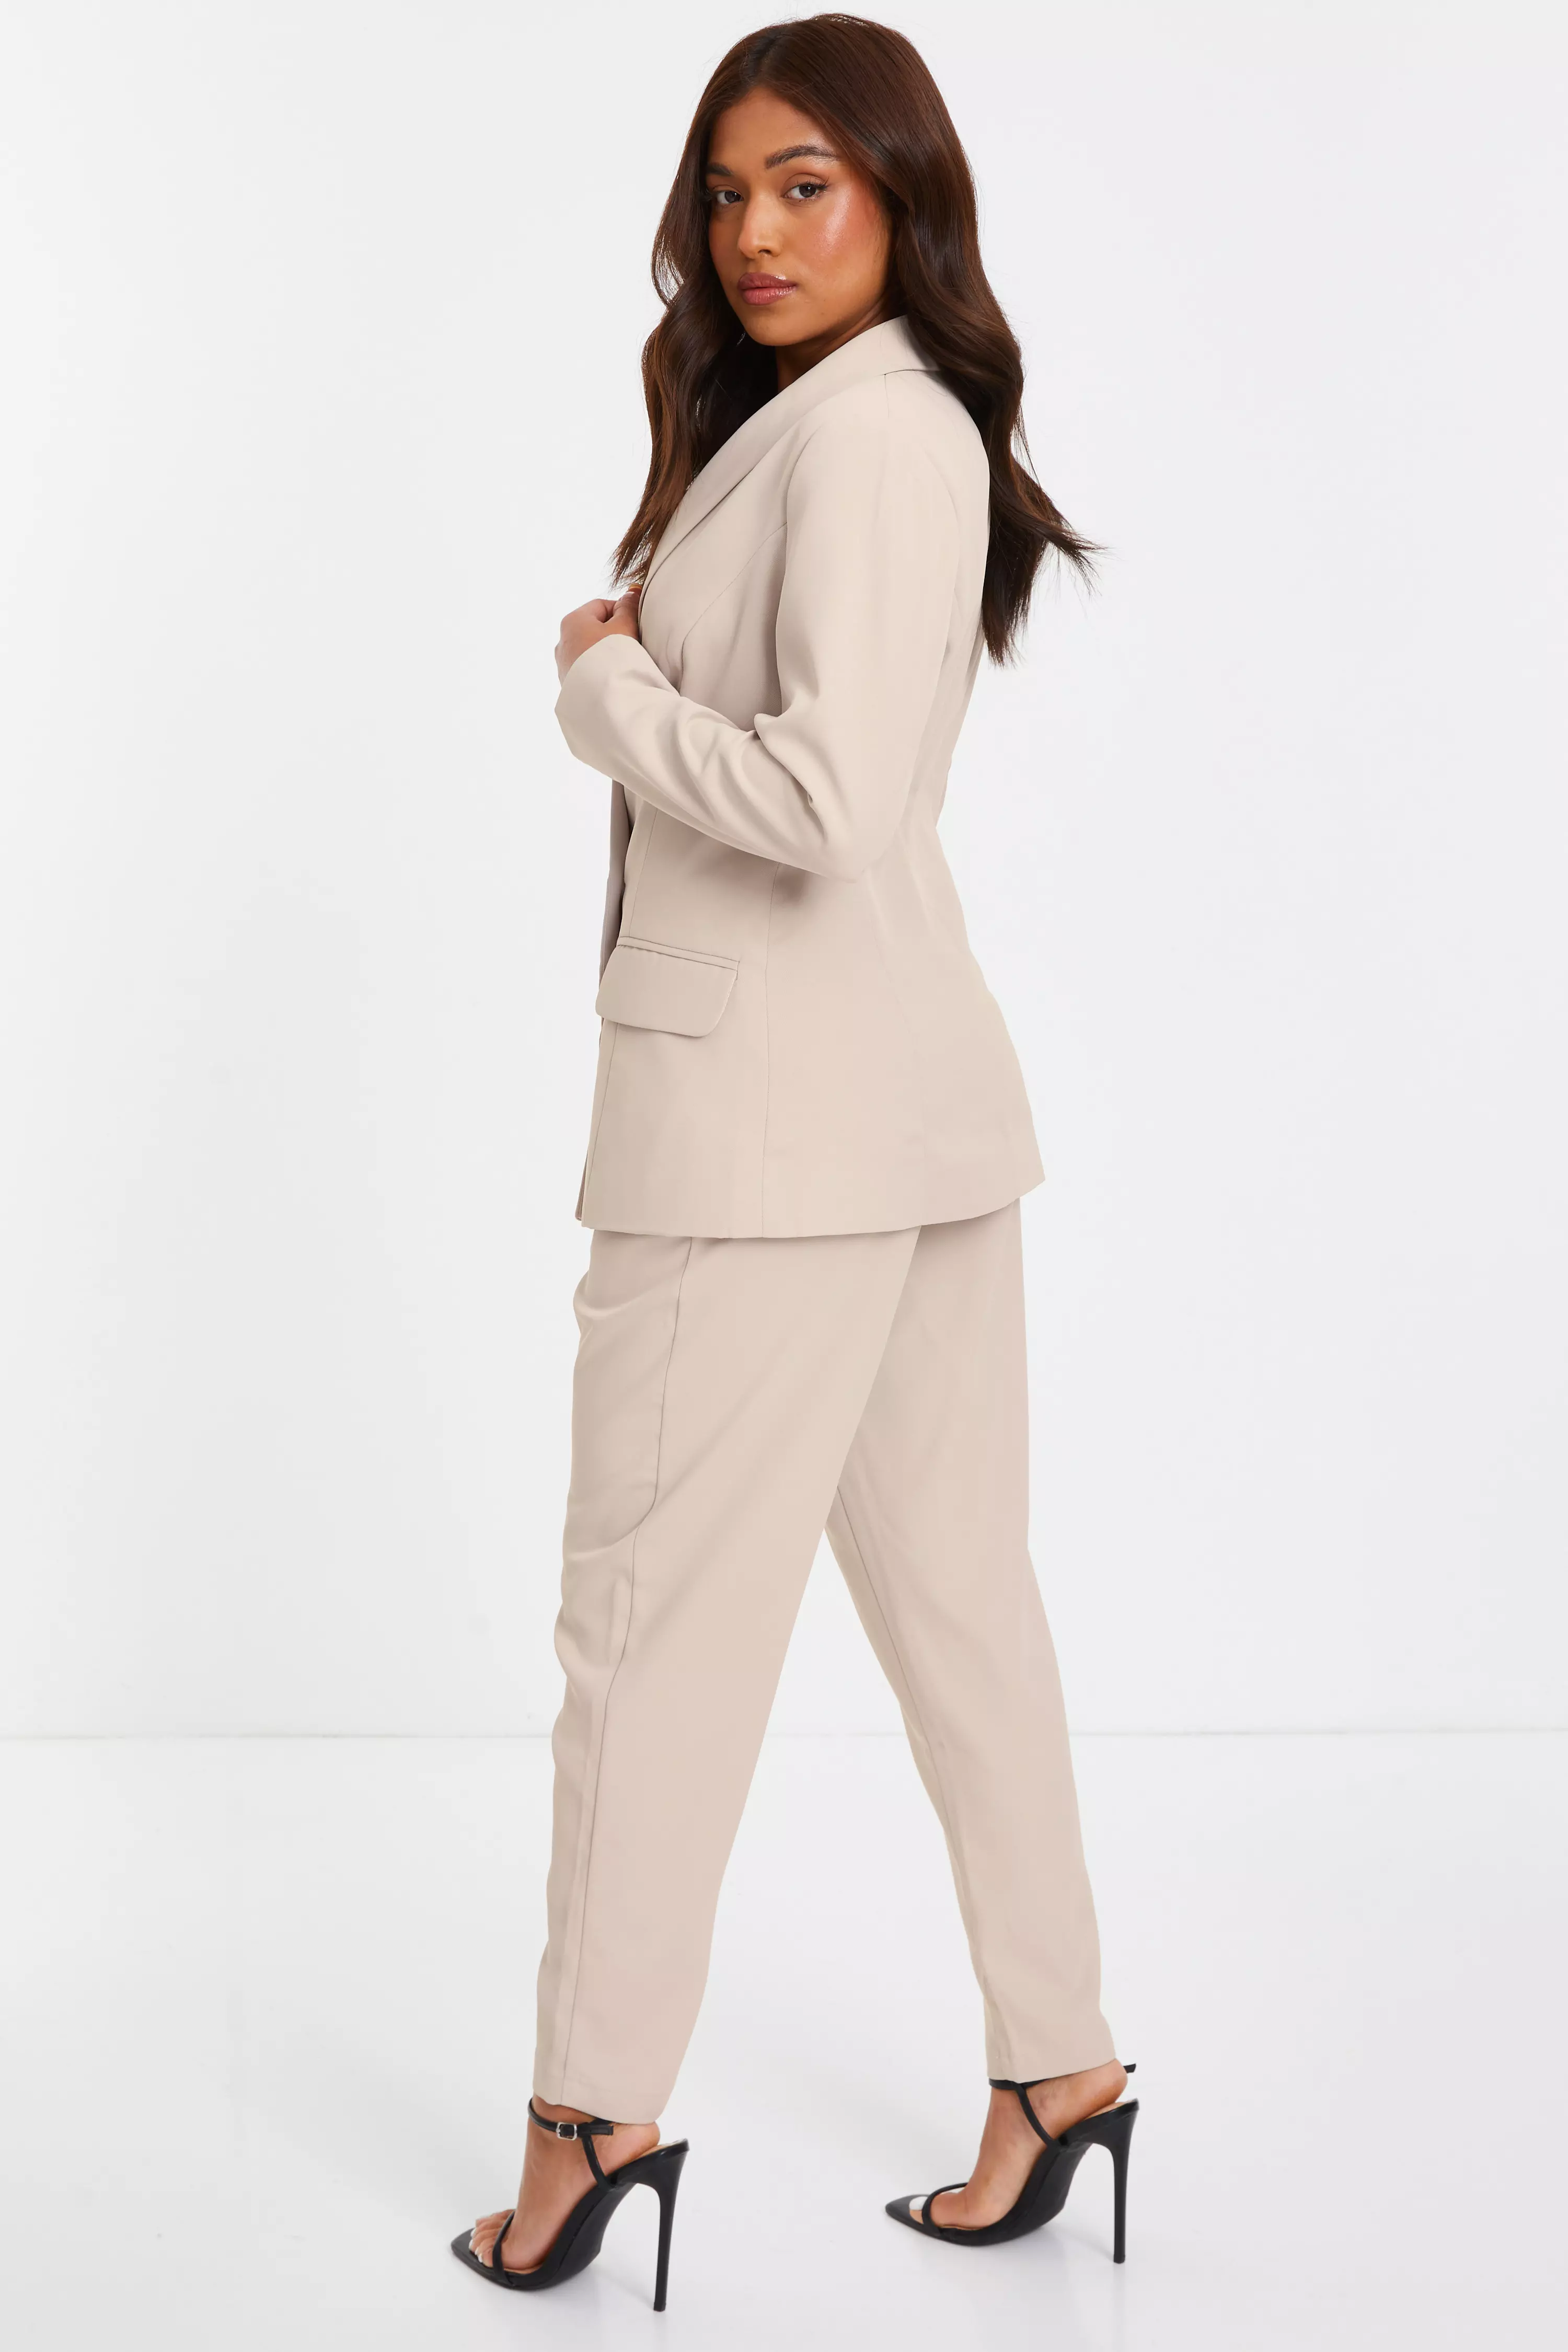 Petite Stone High Waisted Tapered Trousers - QUIZ Clothing